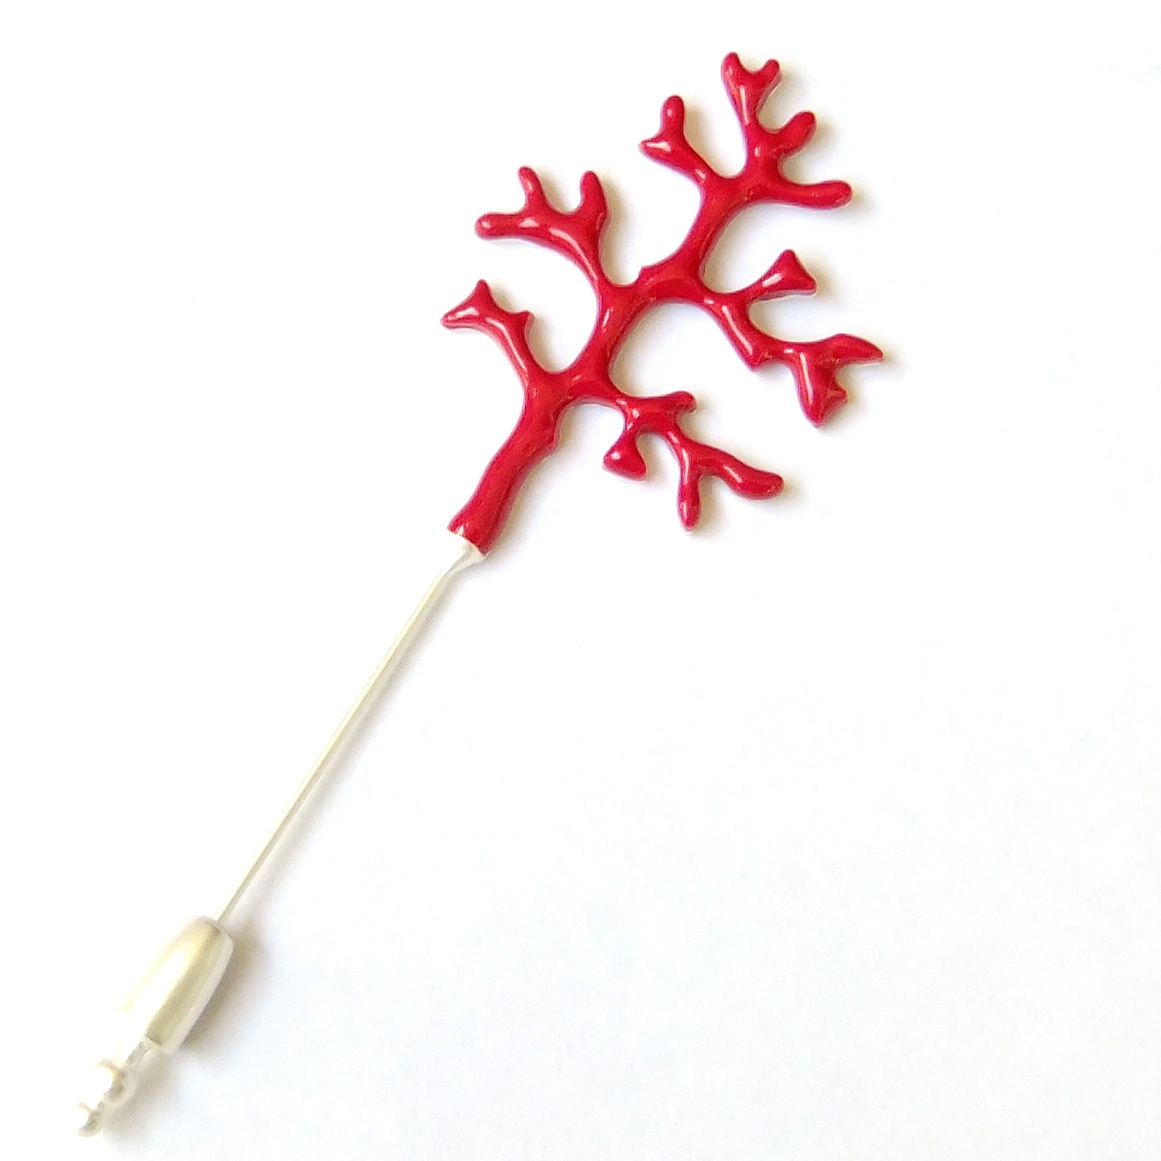 Coral Red Silver Sea Branch Beach Nautical Lovely Elegant Brooch Pin Gift - $8.99